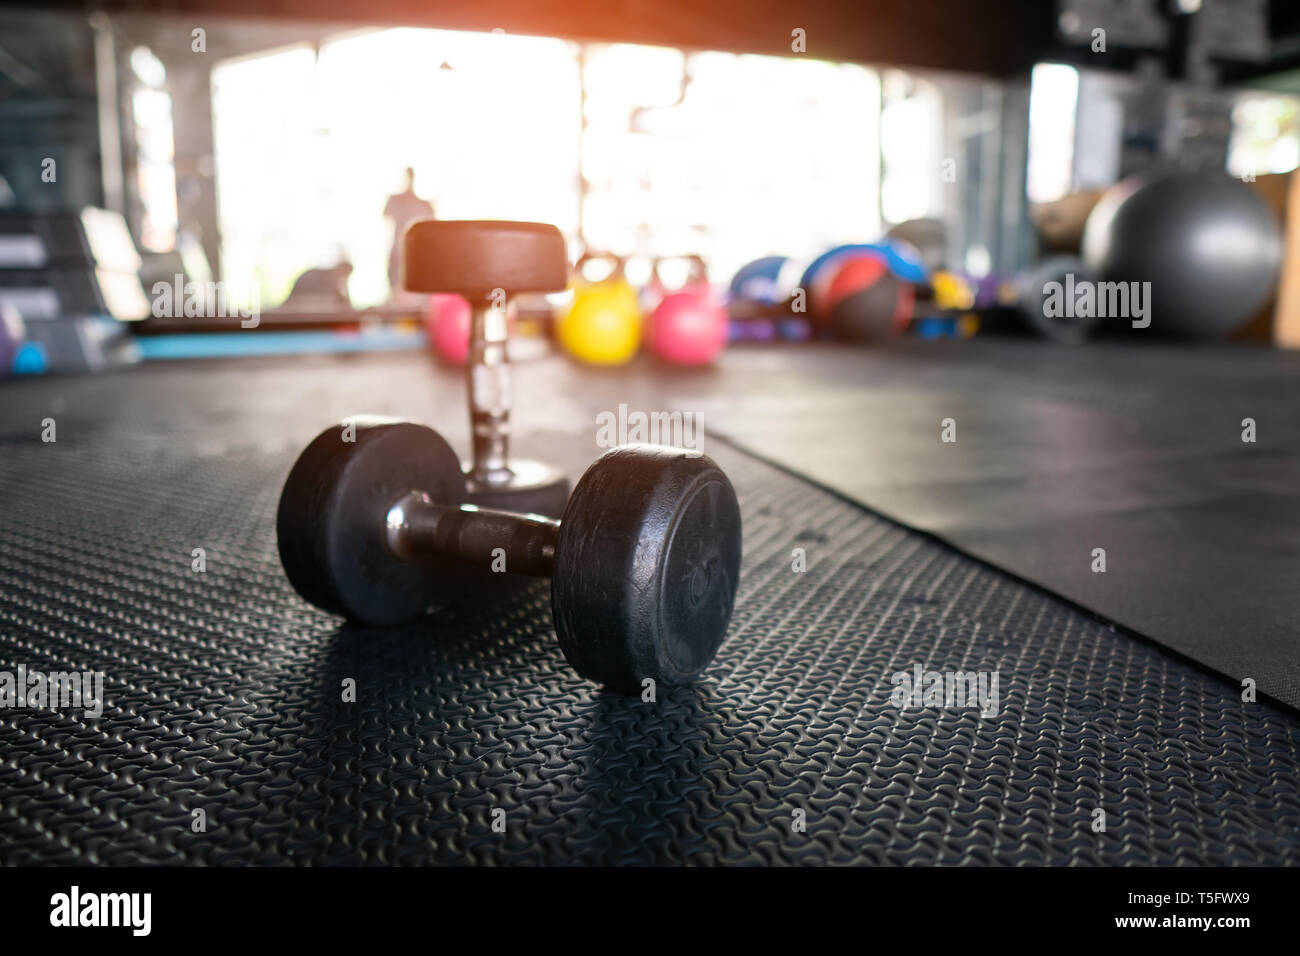 dumbbell weight training equipment with blurry background, Healthy life and gym exercise equipments and sports concept, with copy space Stock Photo